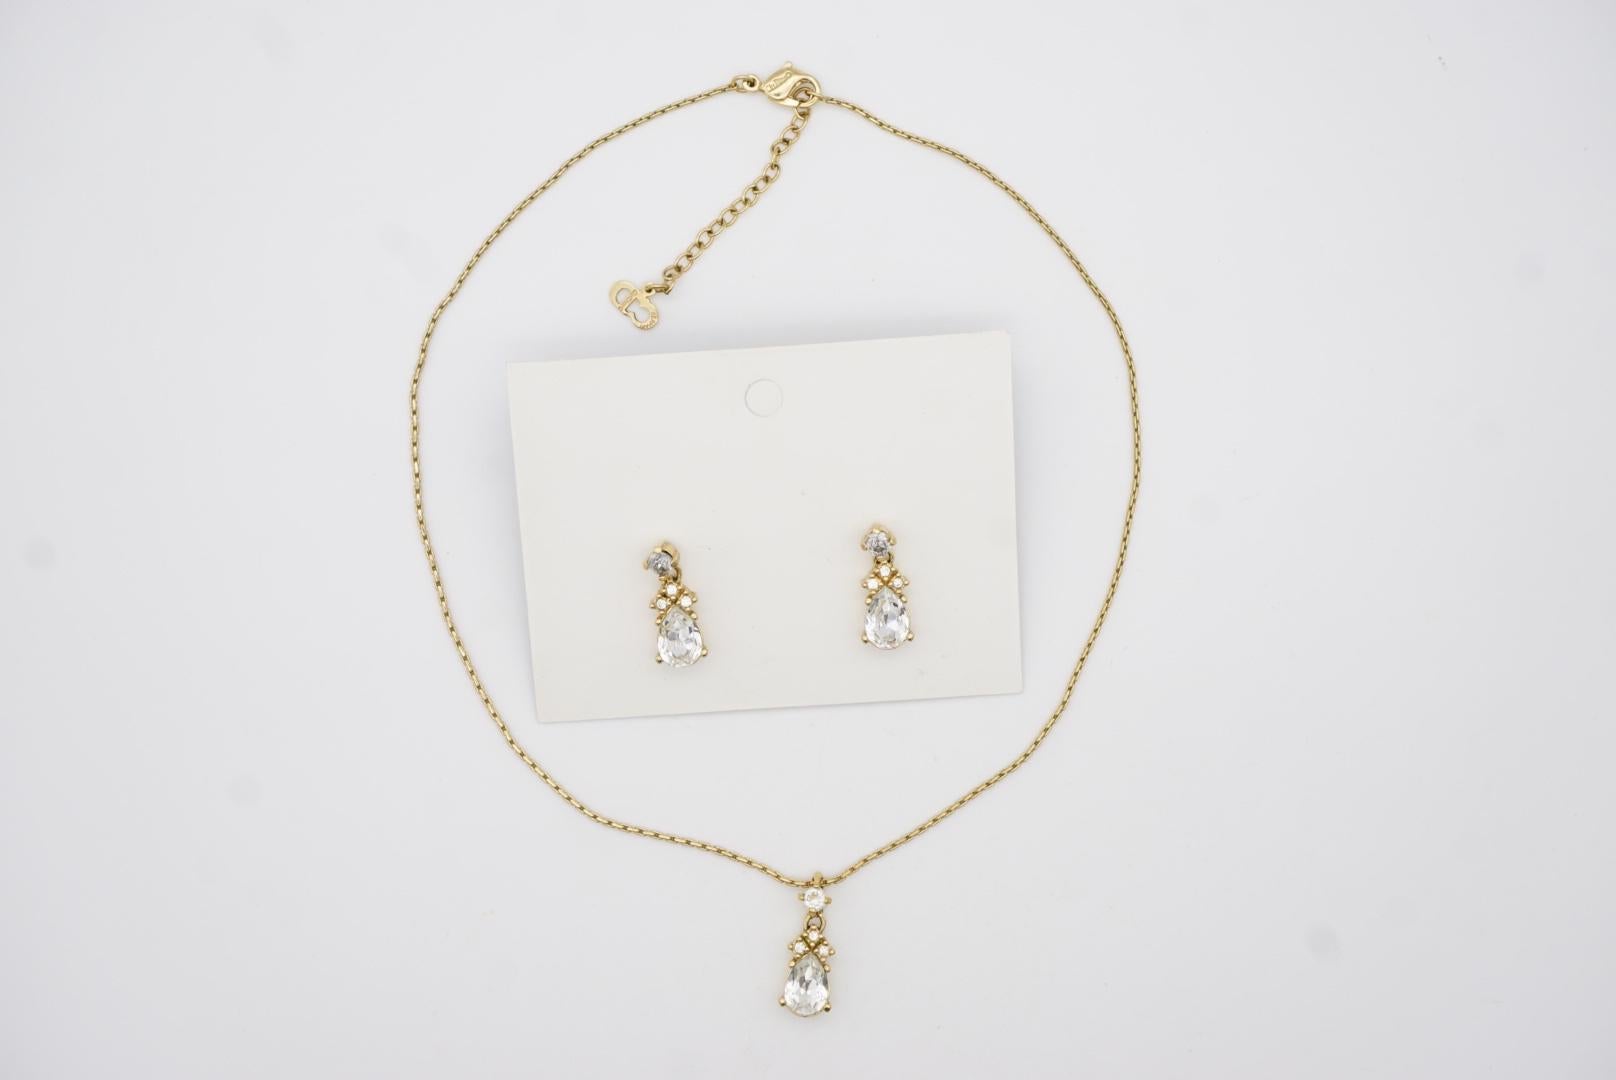 Christian Dior Vintage 1980s Crystal Water Tear Drop Set Gold Necklace Earrings For Sale 2